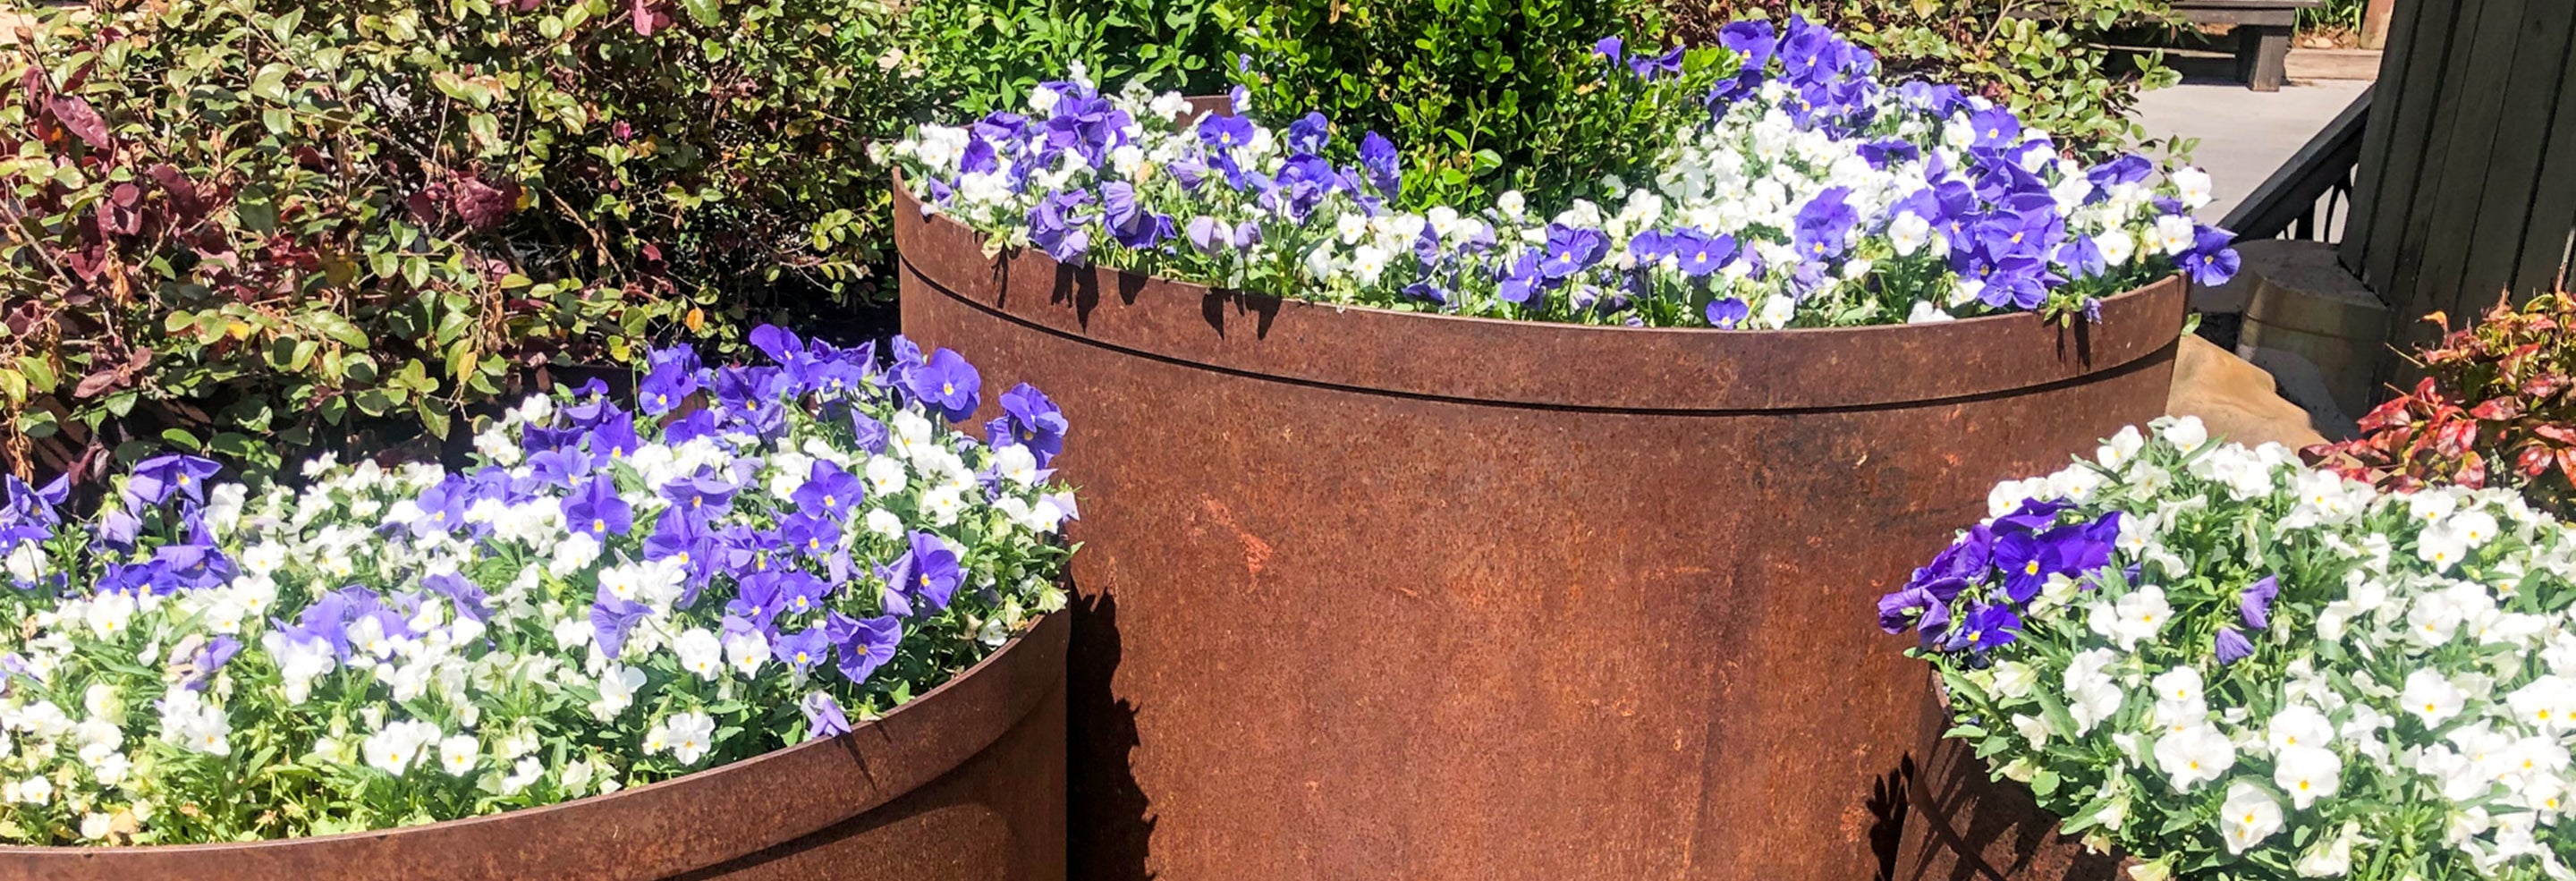 Round Weathering Steel Planter with Plants